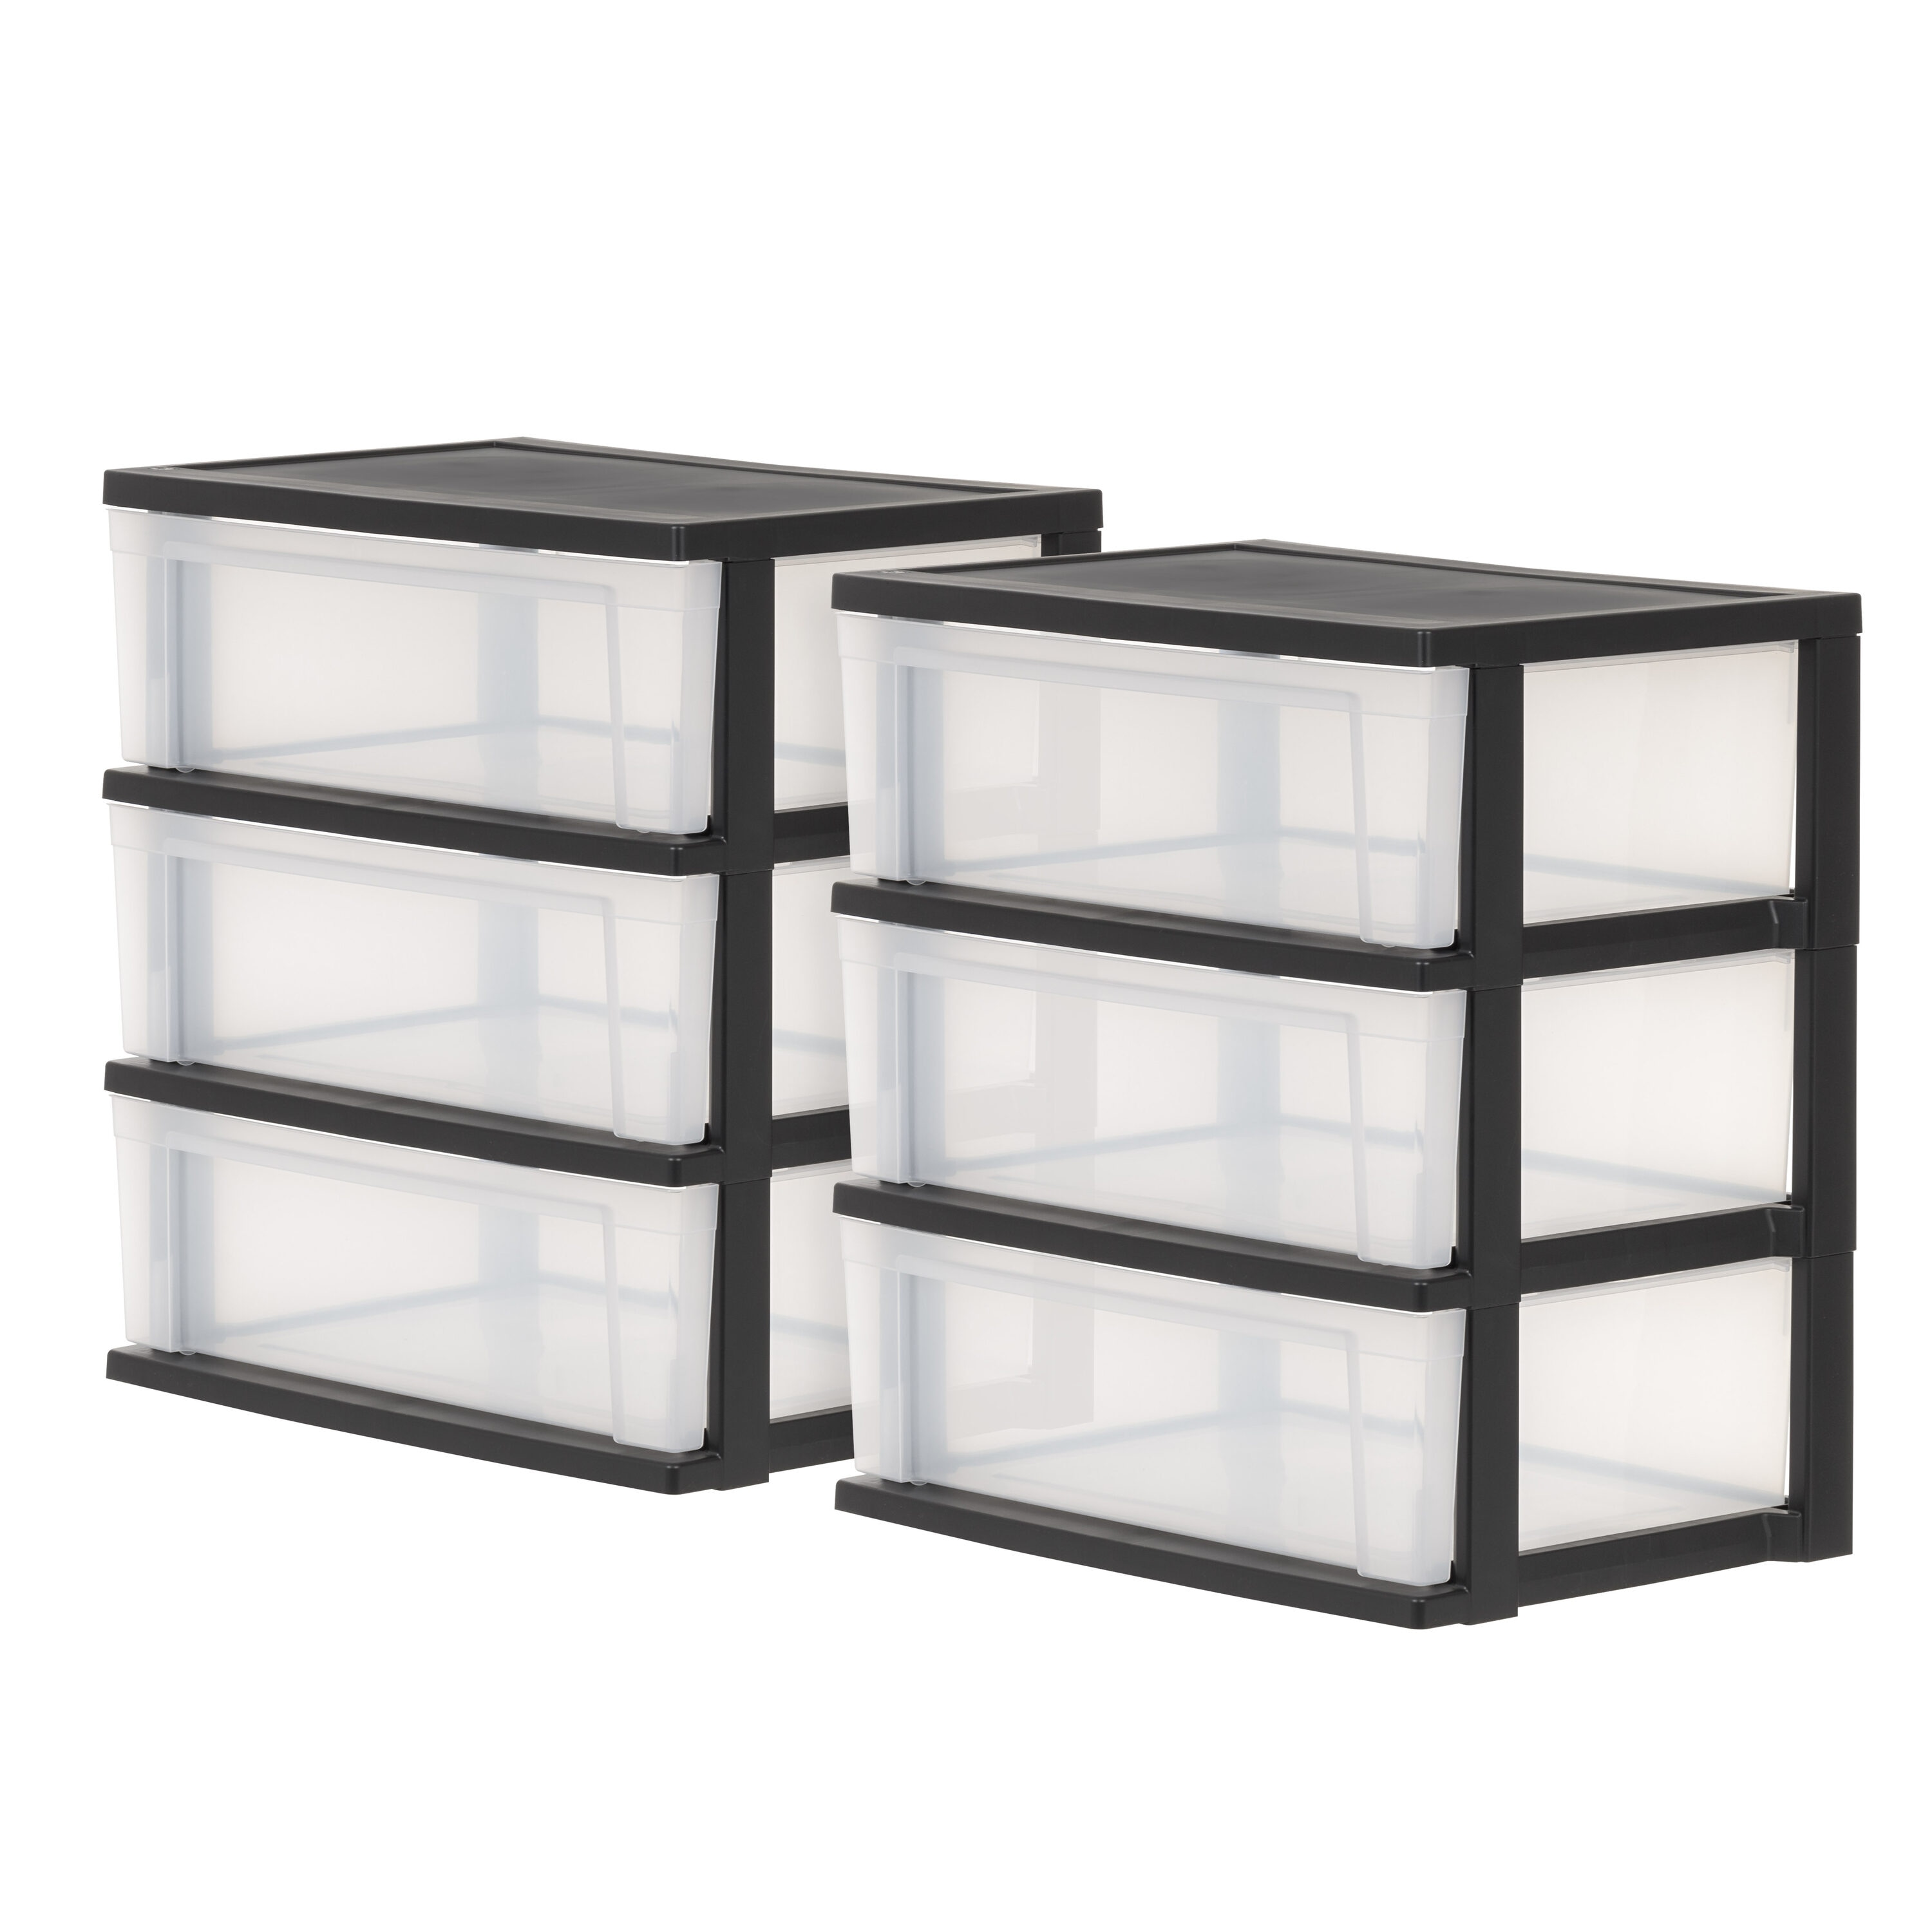 Thyle 2 Pcs Plastic Drawers Organizer Mini Organizer Box Stackable Plastic  Drawer Storage Organizer Containers Clear Storage Drawer Units for Desktop